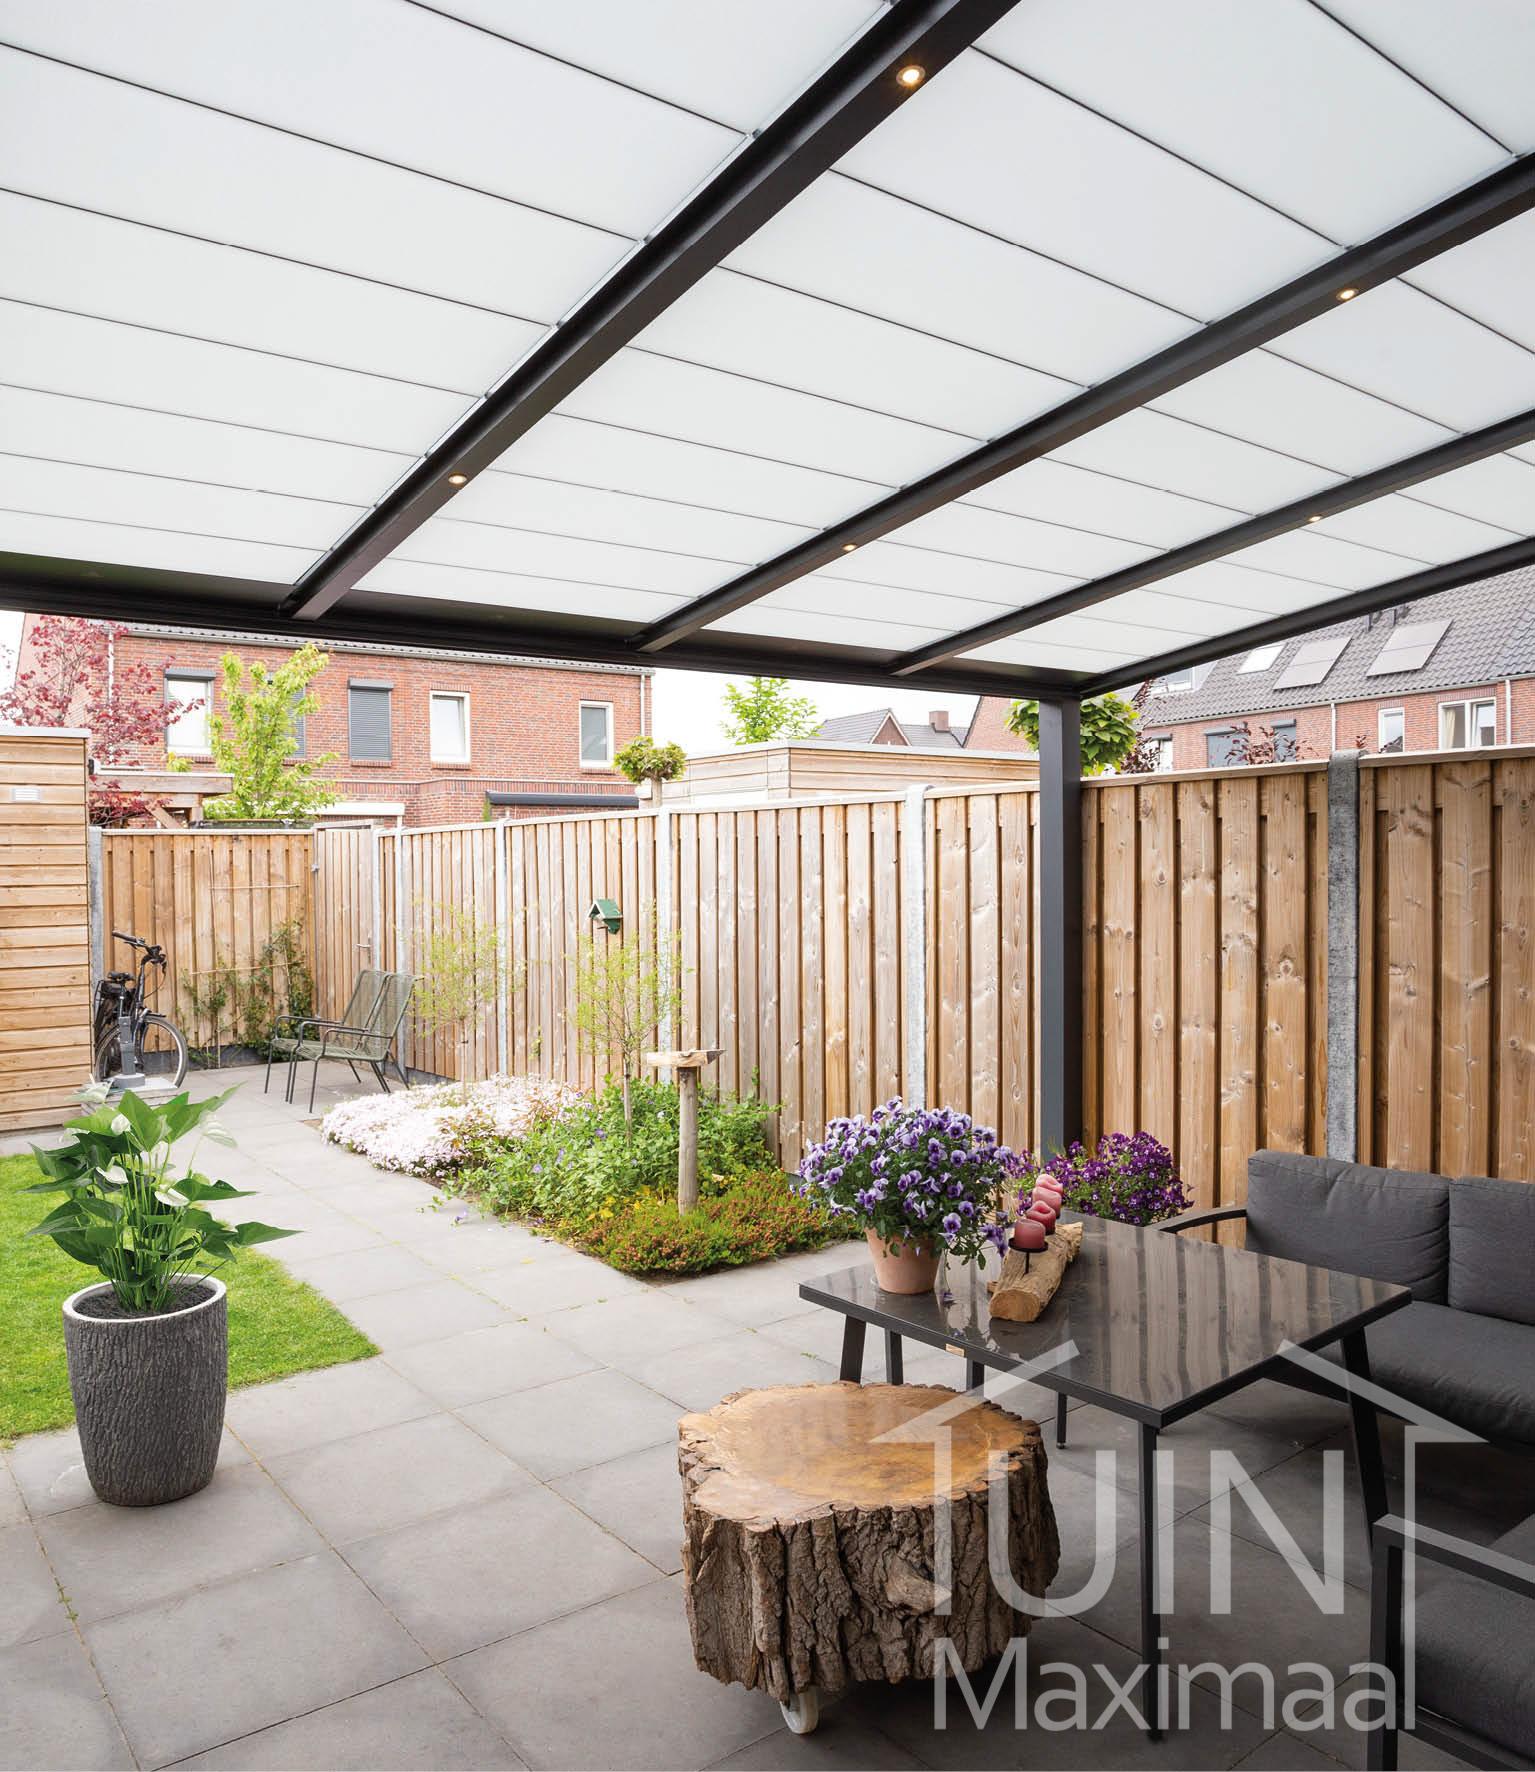 View automatic sun shading for patio covers